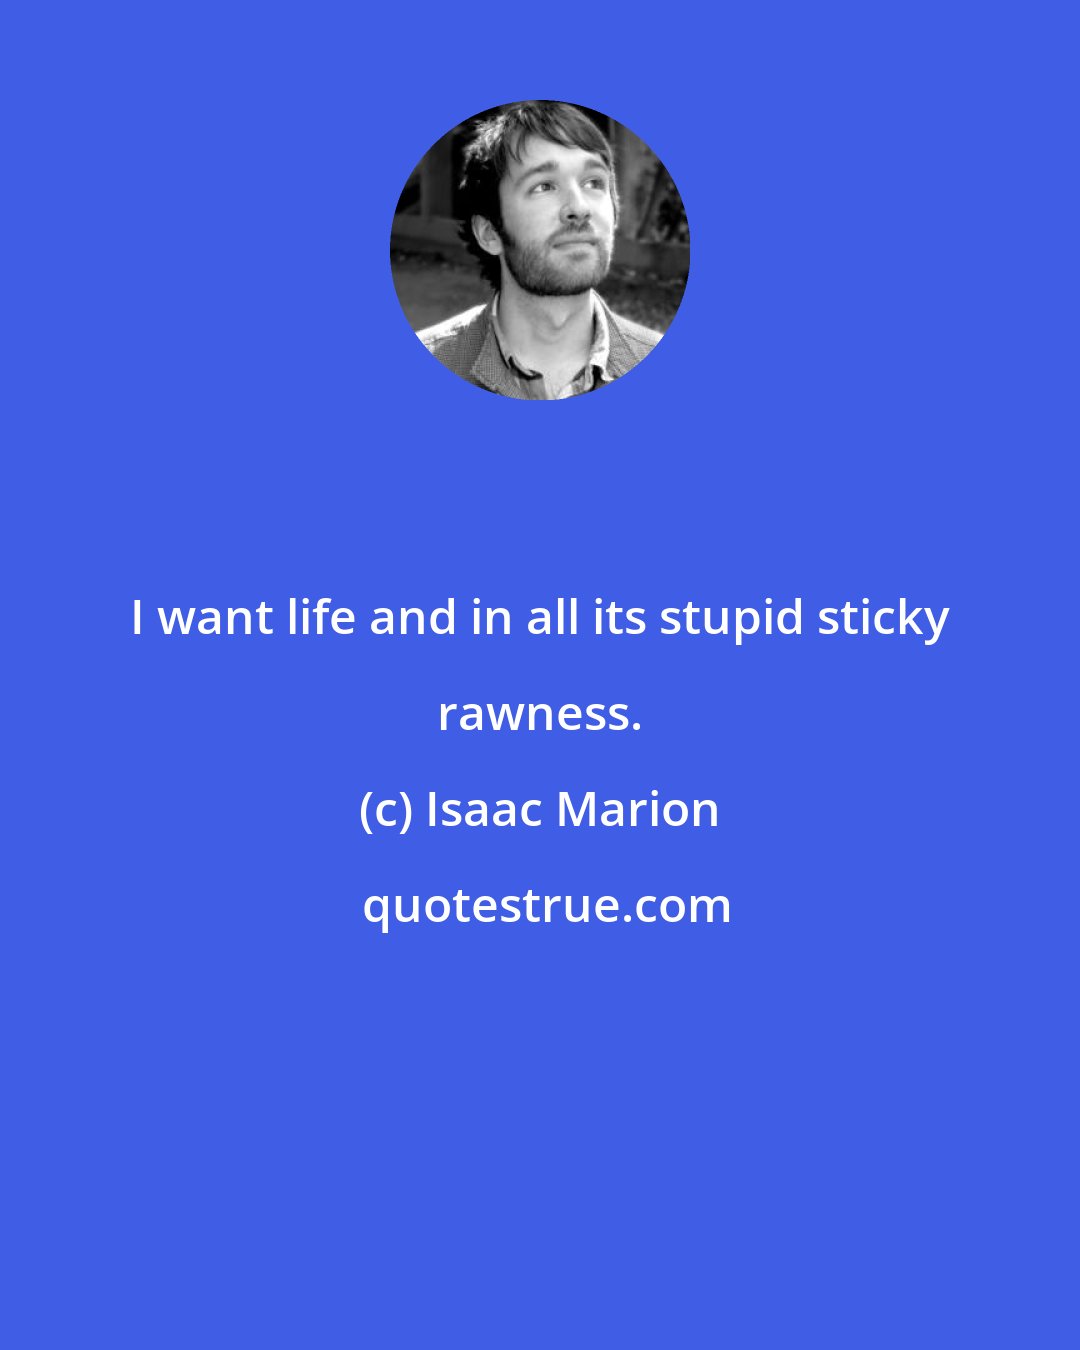 Isaac Marion: I want life and in all its stupid sticky rawness.